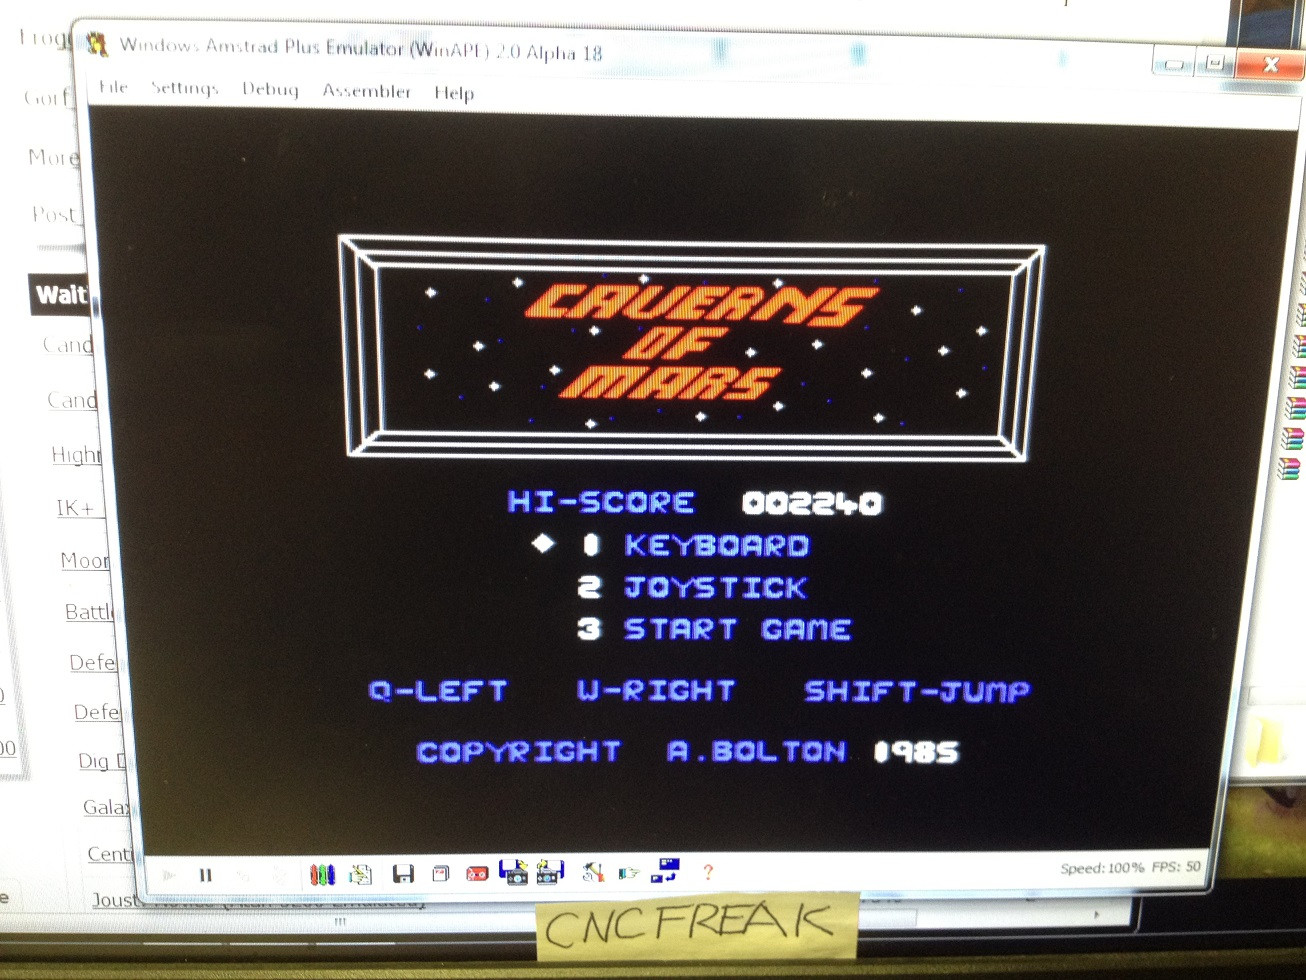 cncfreak: Caverns of Mars (Amstrad CPC Emulated) 2,240 points on 2013-10-17 07:23:45